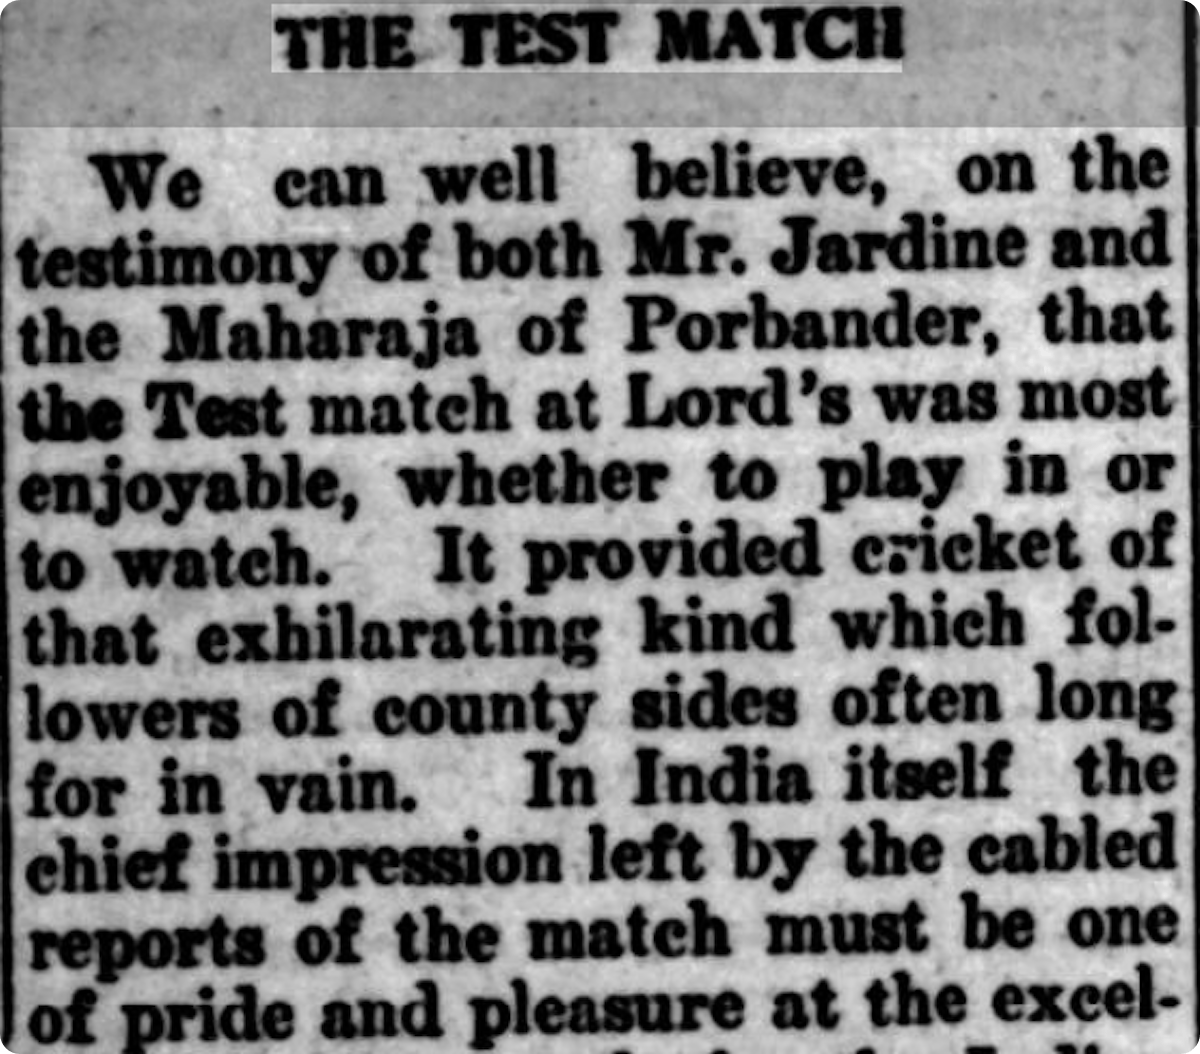 The Civil & Military Gazette (Lahore) reporting on the pride of the Indian team, 1932.